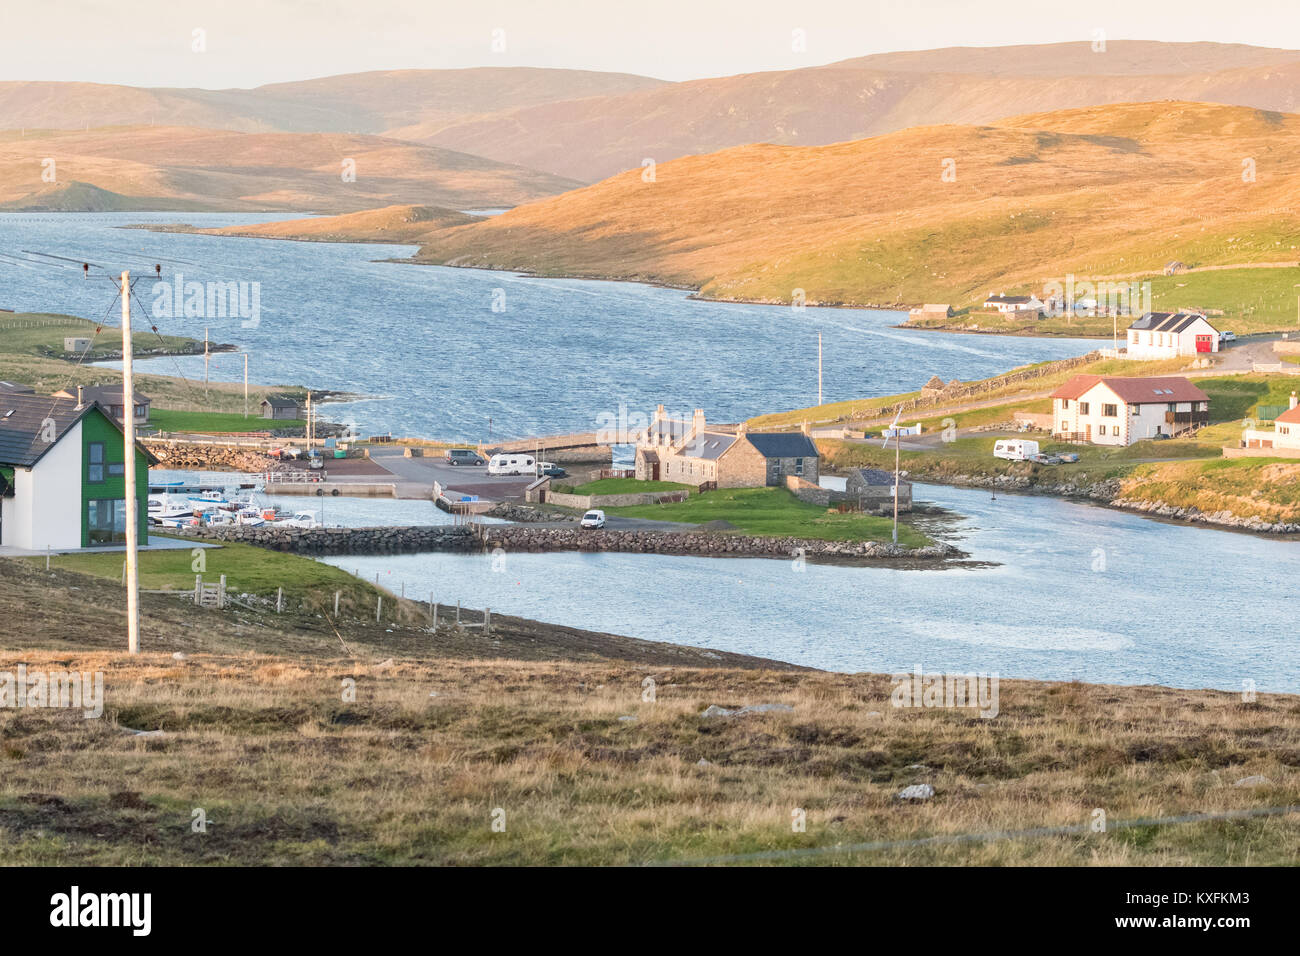 Bridge End Outdoor Centre and Marina at the head of South Voe with Lang Sound beyond seen from West Burra looking towards East Burra, Shetland Islands Stock Photo